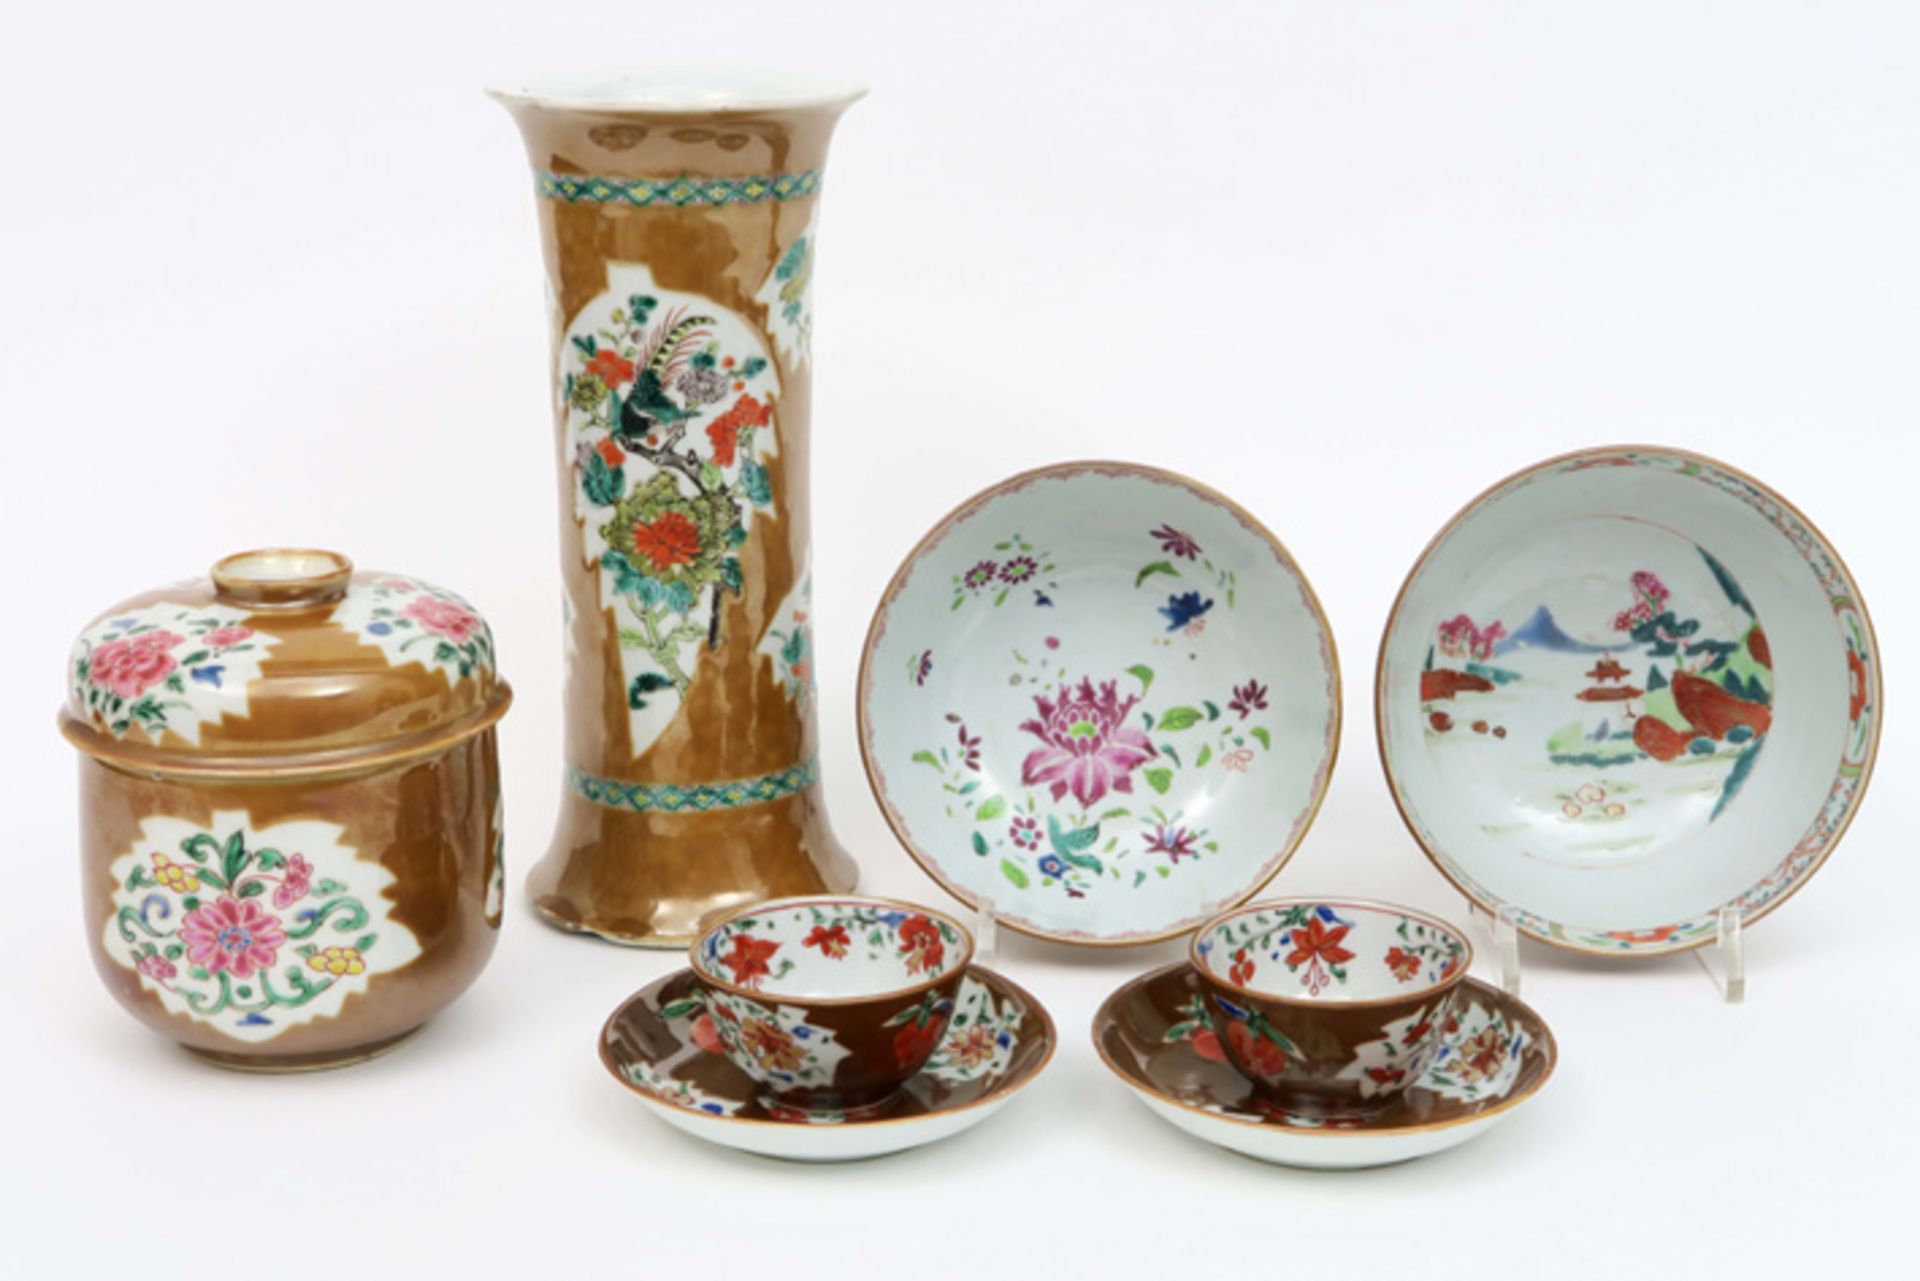 eight 18th Cent. Chinese items in "café au lait" porcelain : lidded pot, two sets of cup and - Image 2 of 4